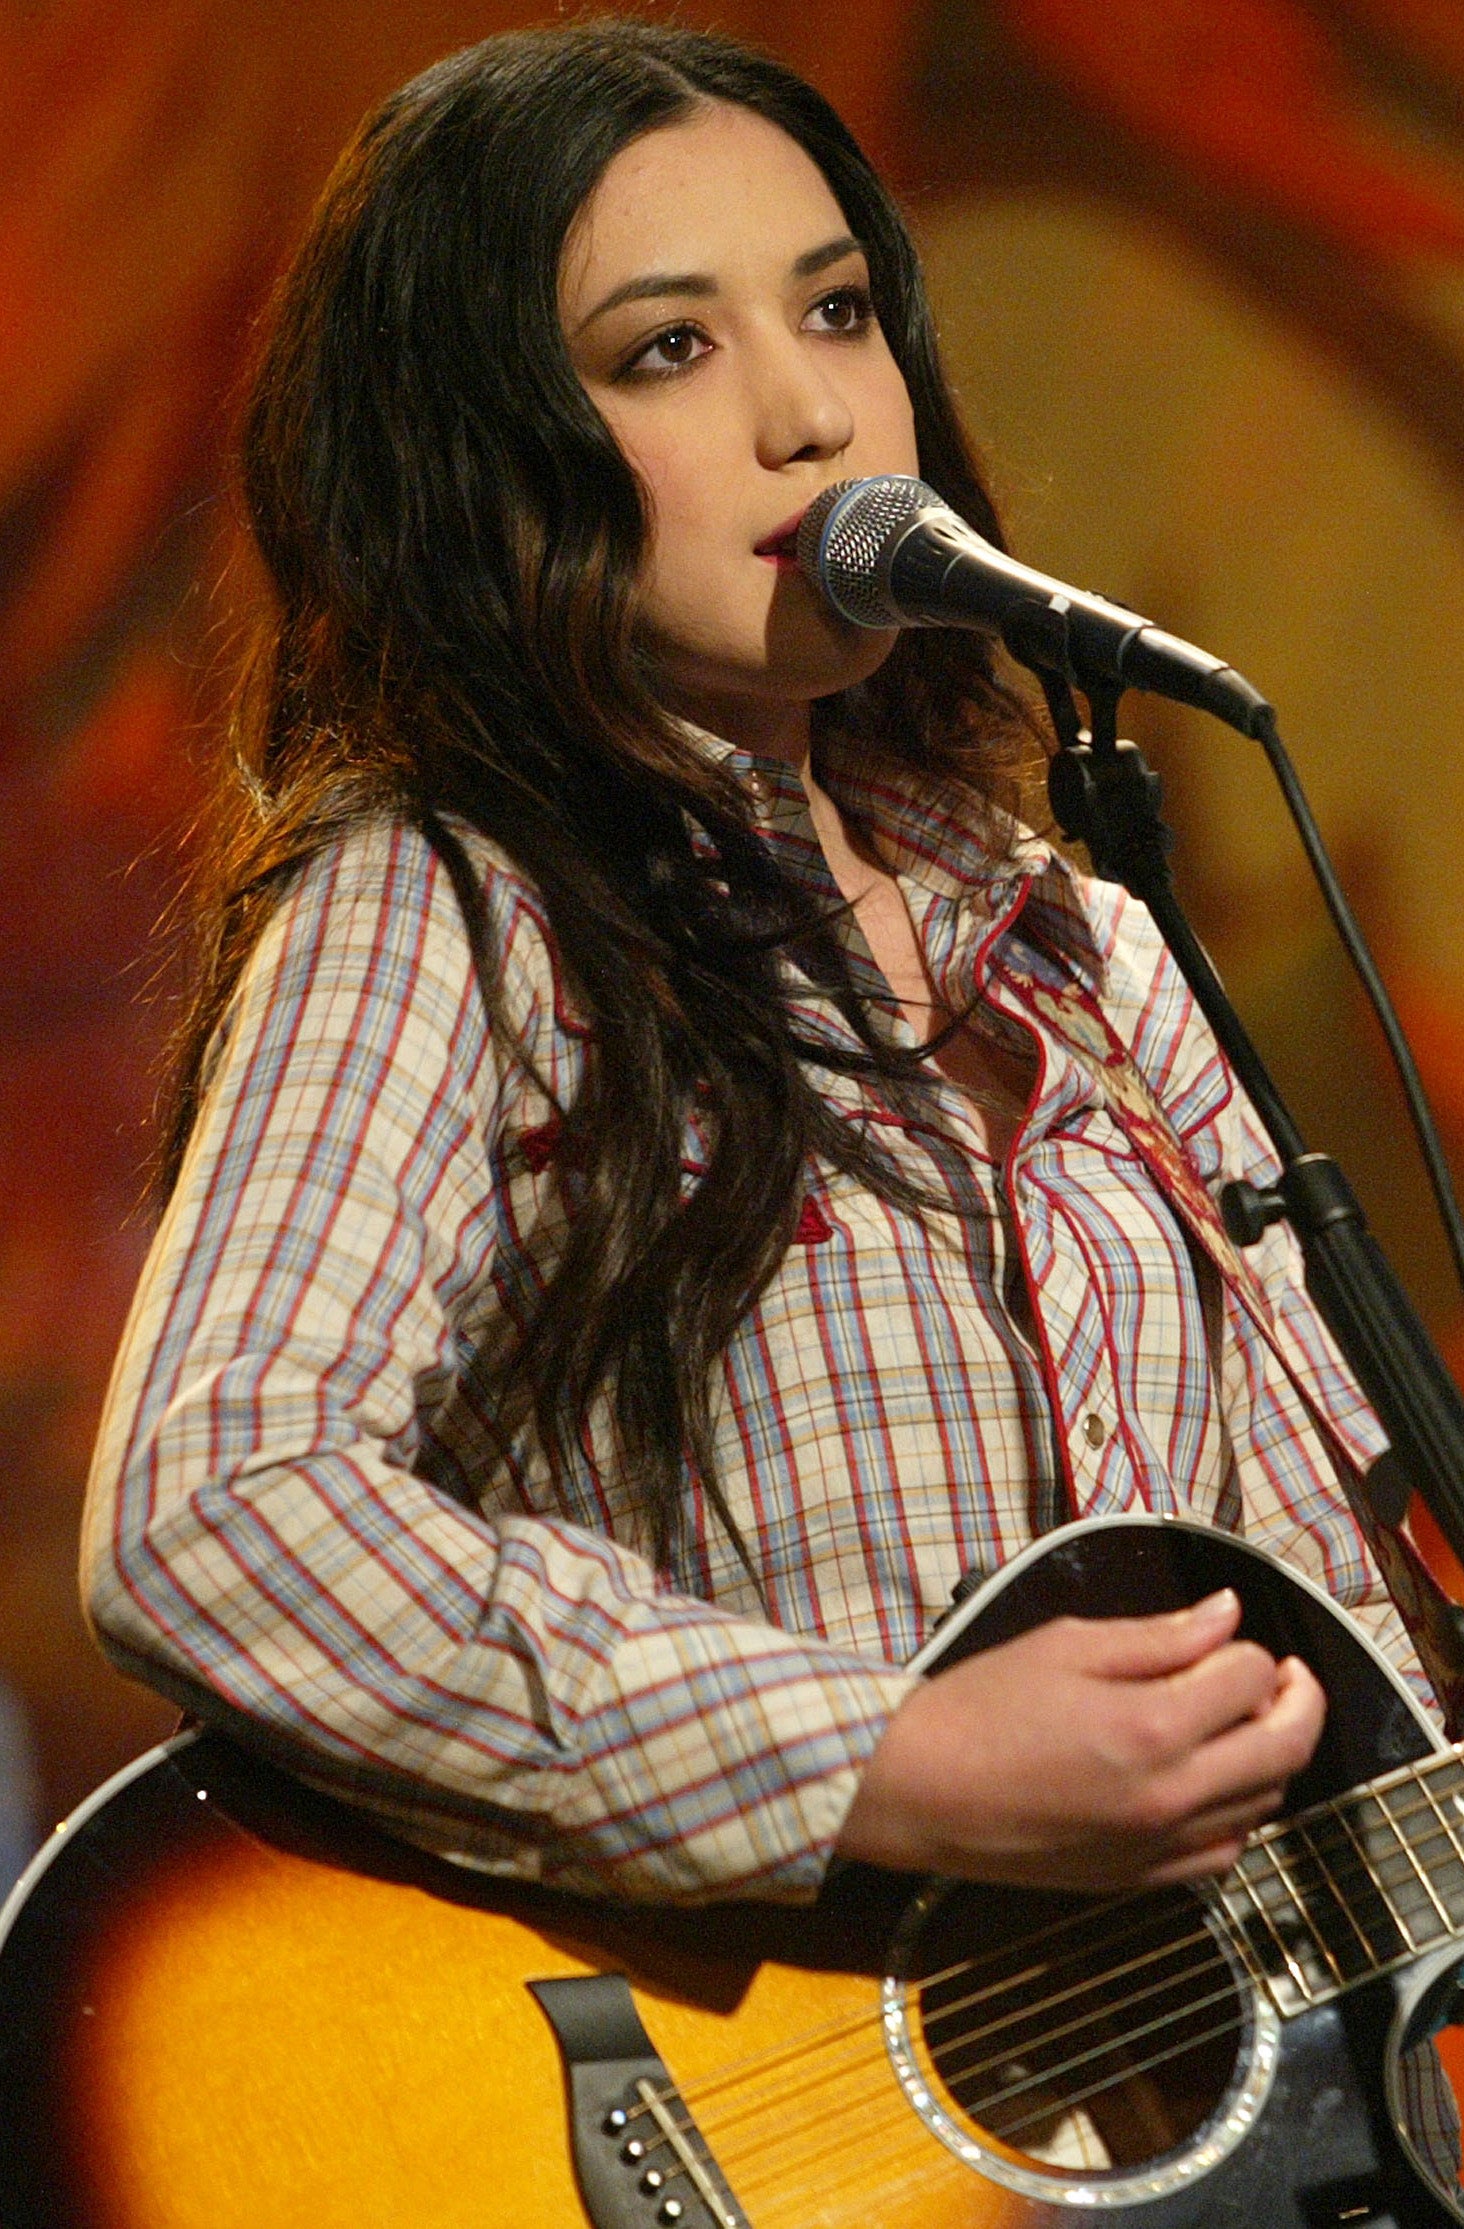 Singer Michelle Branch expecting child with Black Keys' Patrick